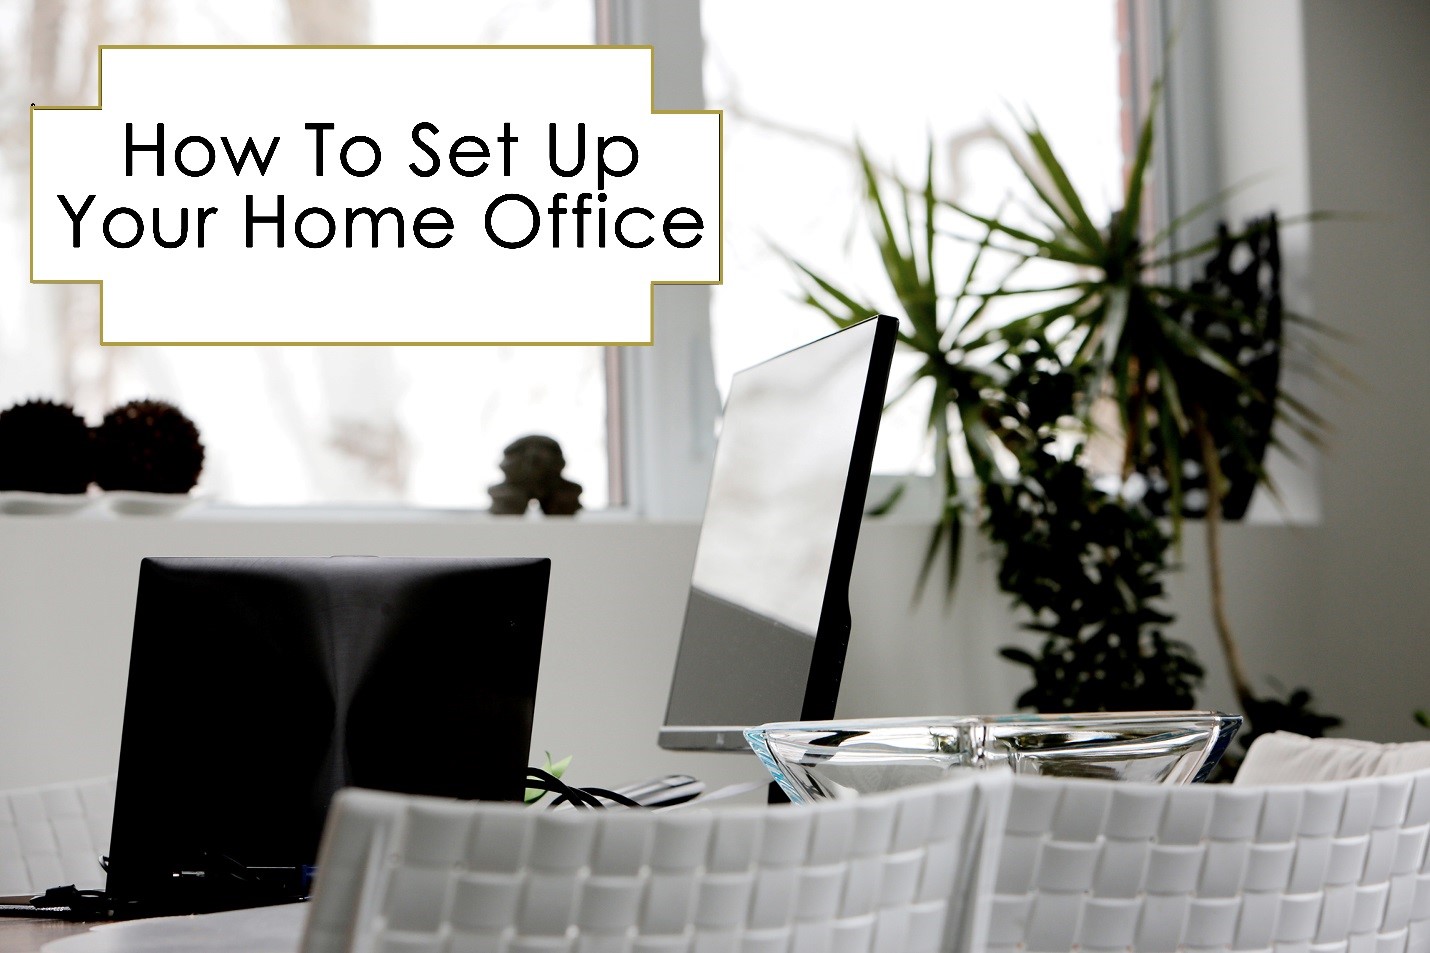 How to Set Up Your Home Office